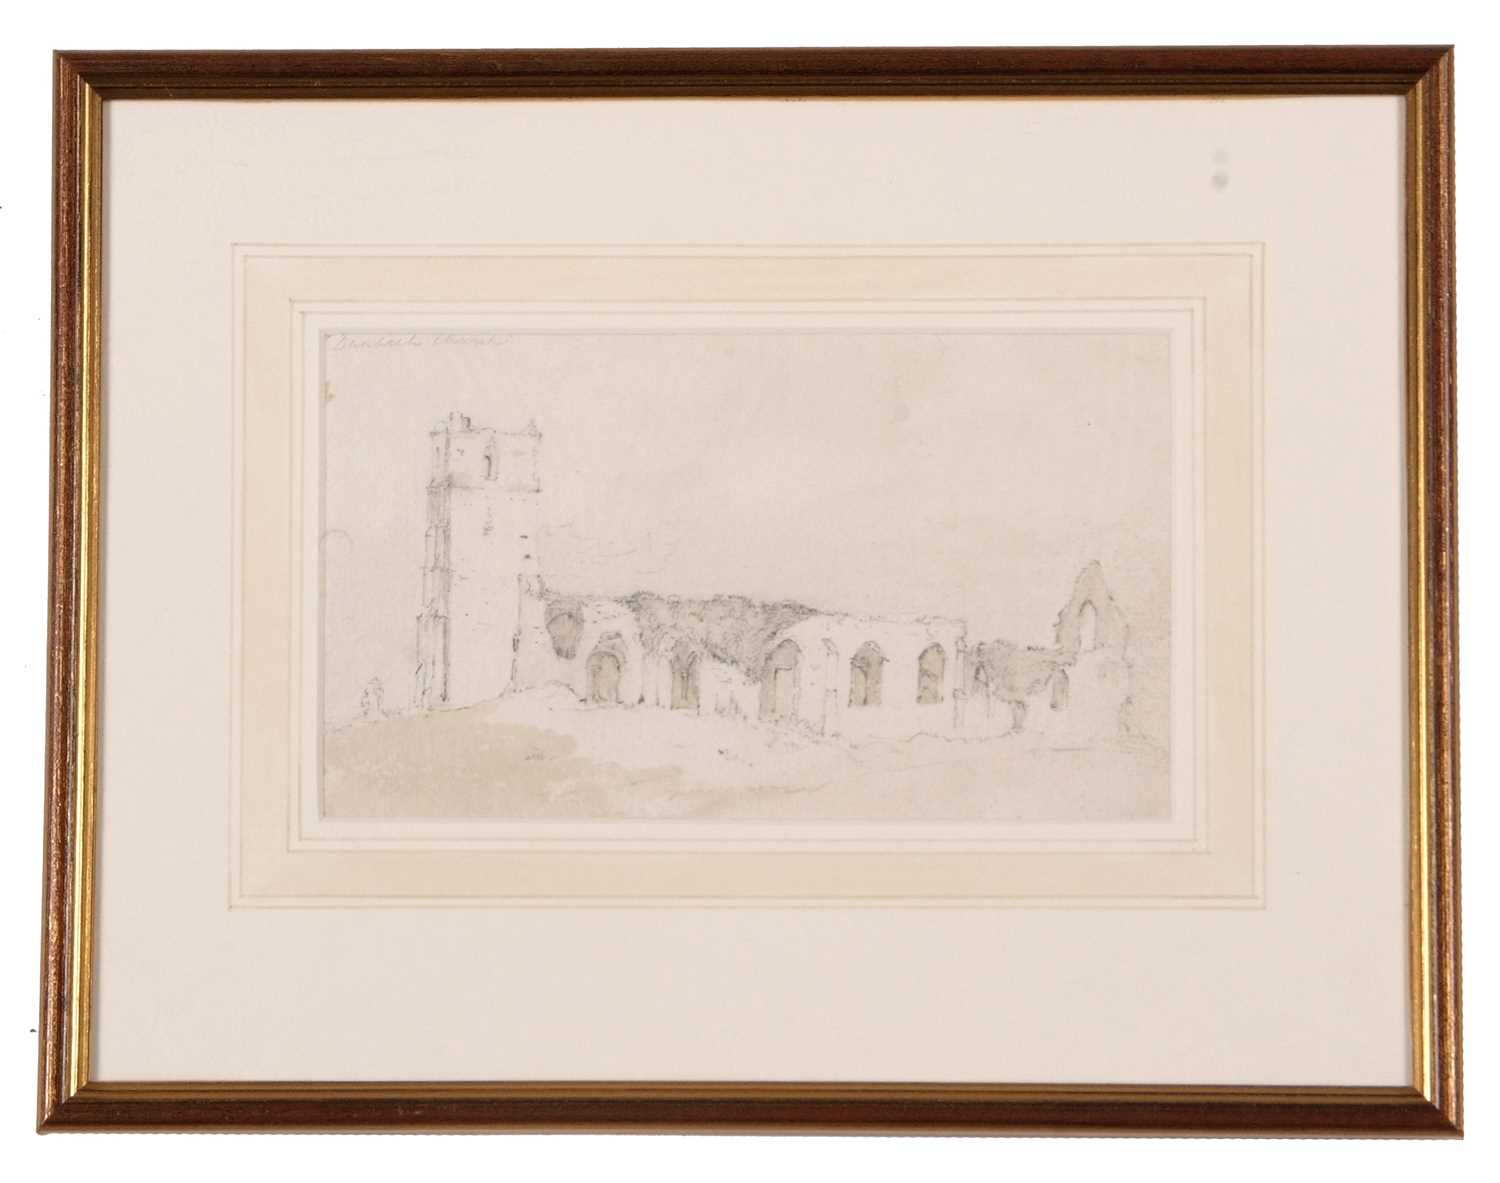 Attributed to John Sell Cotman (1782-1842), 'Dunwich Church', pencil and wash, inscribed 'Dunwich - Image 2 of 2